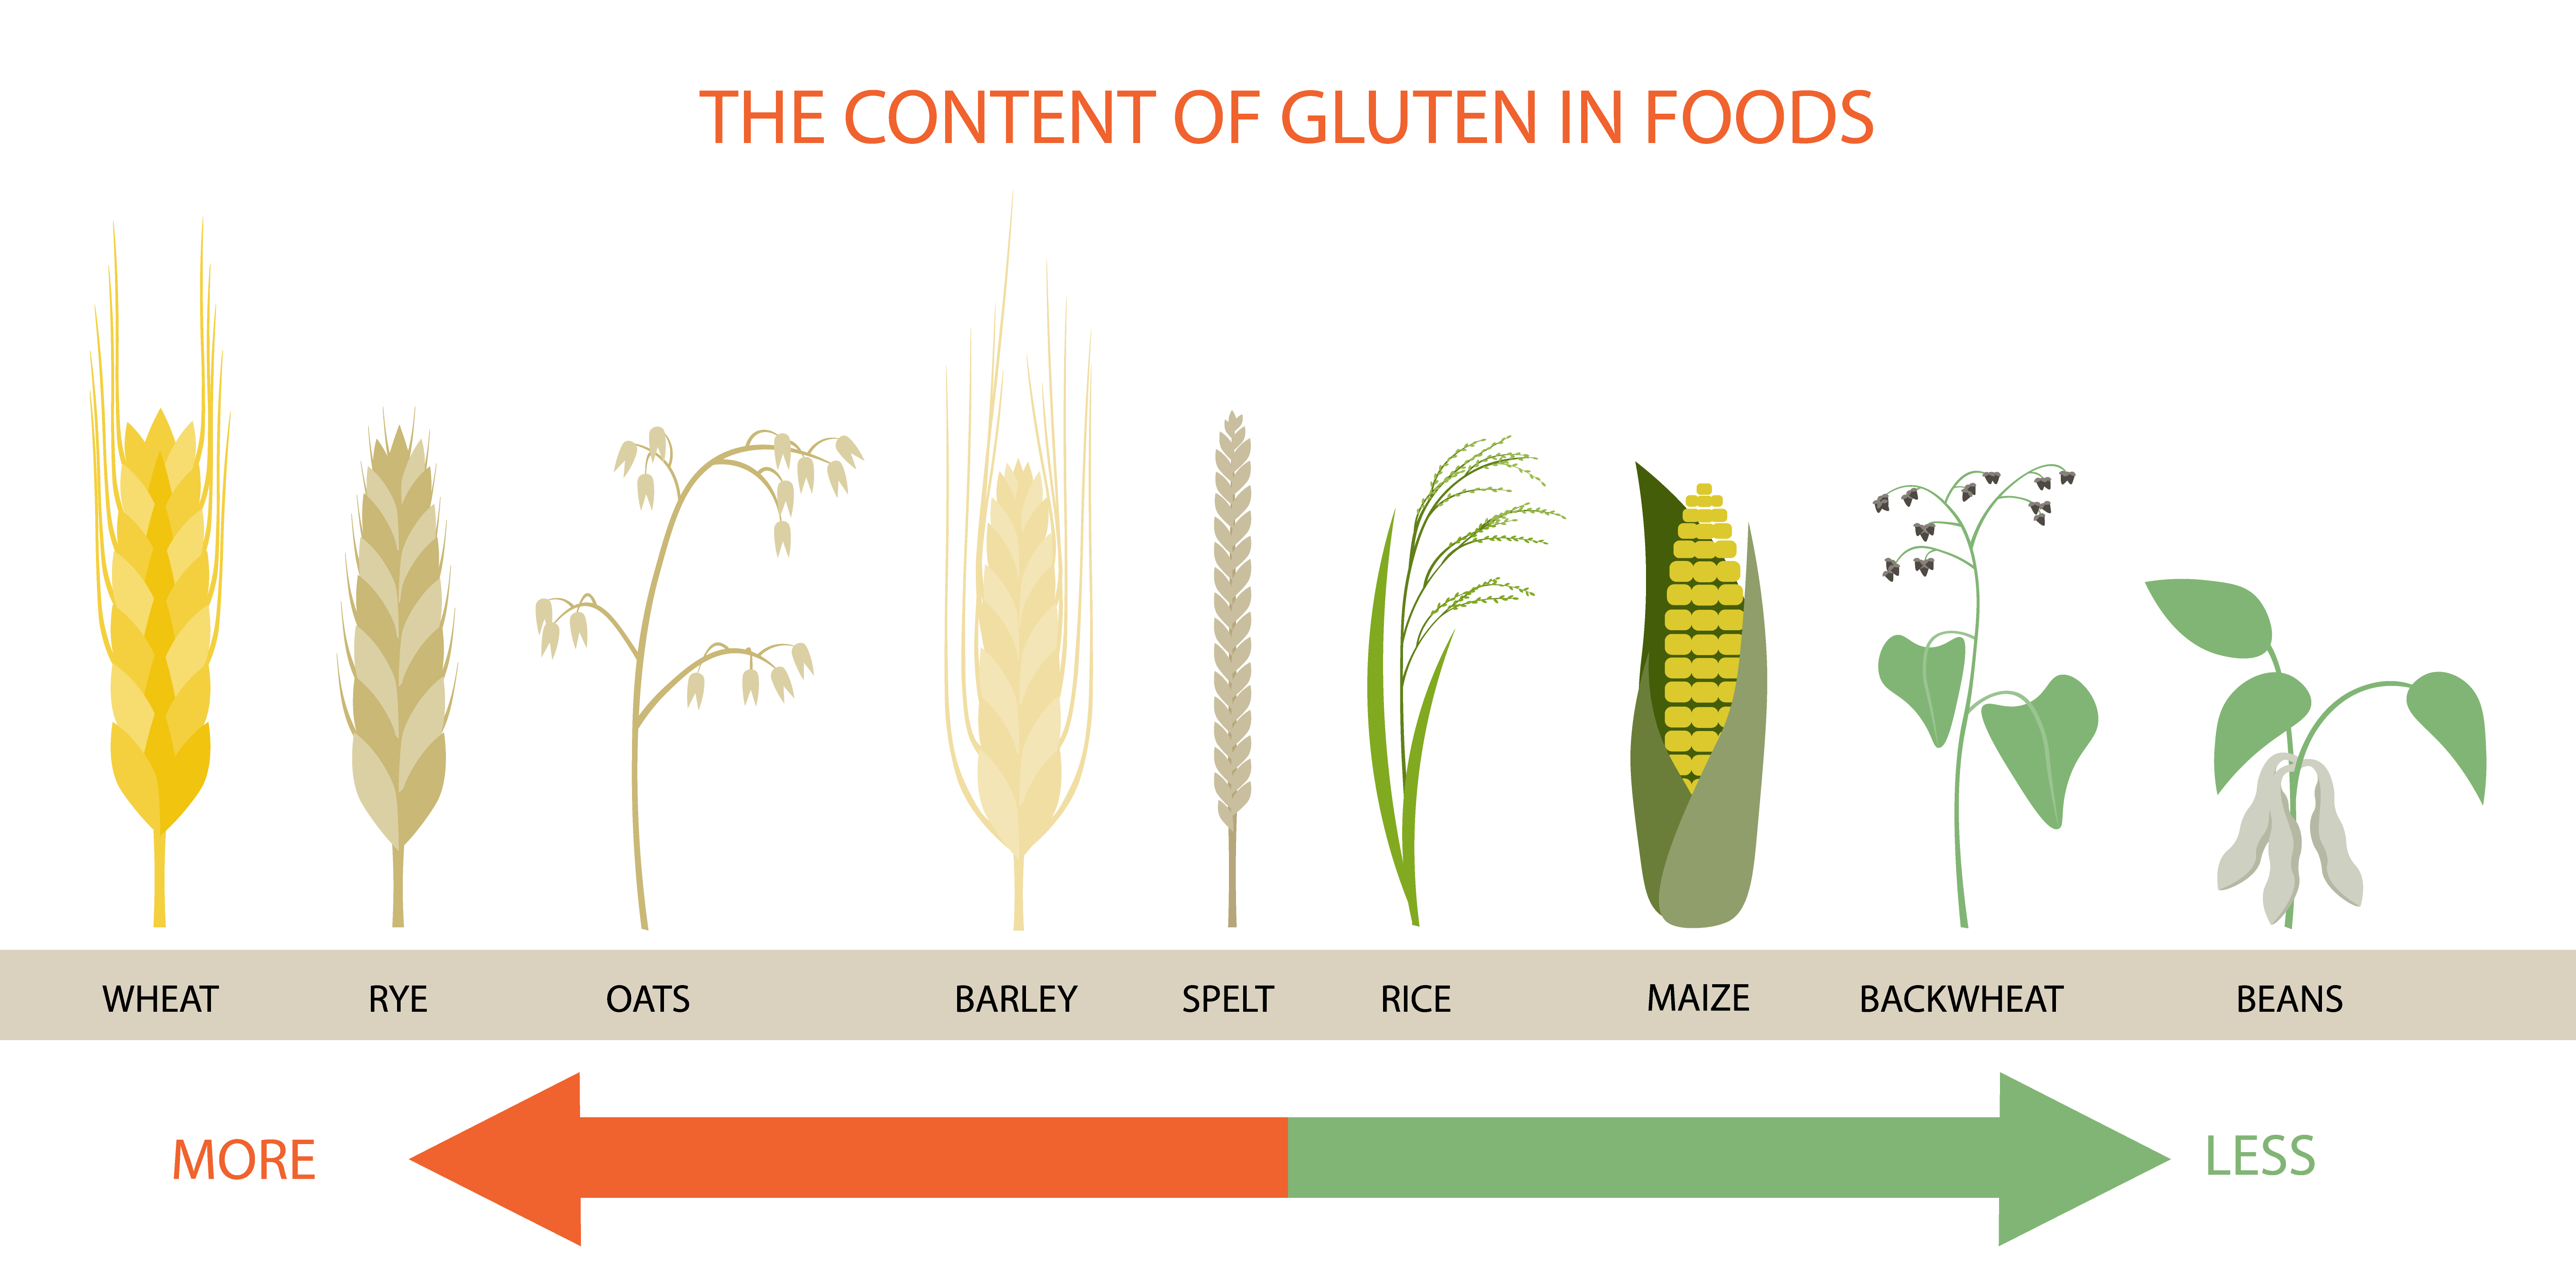 Where we can find gluten naturally?